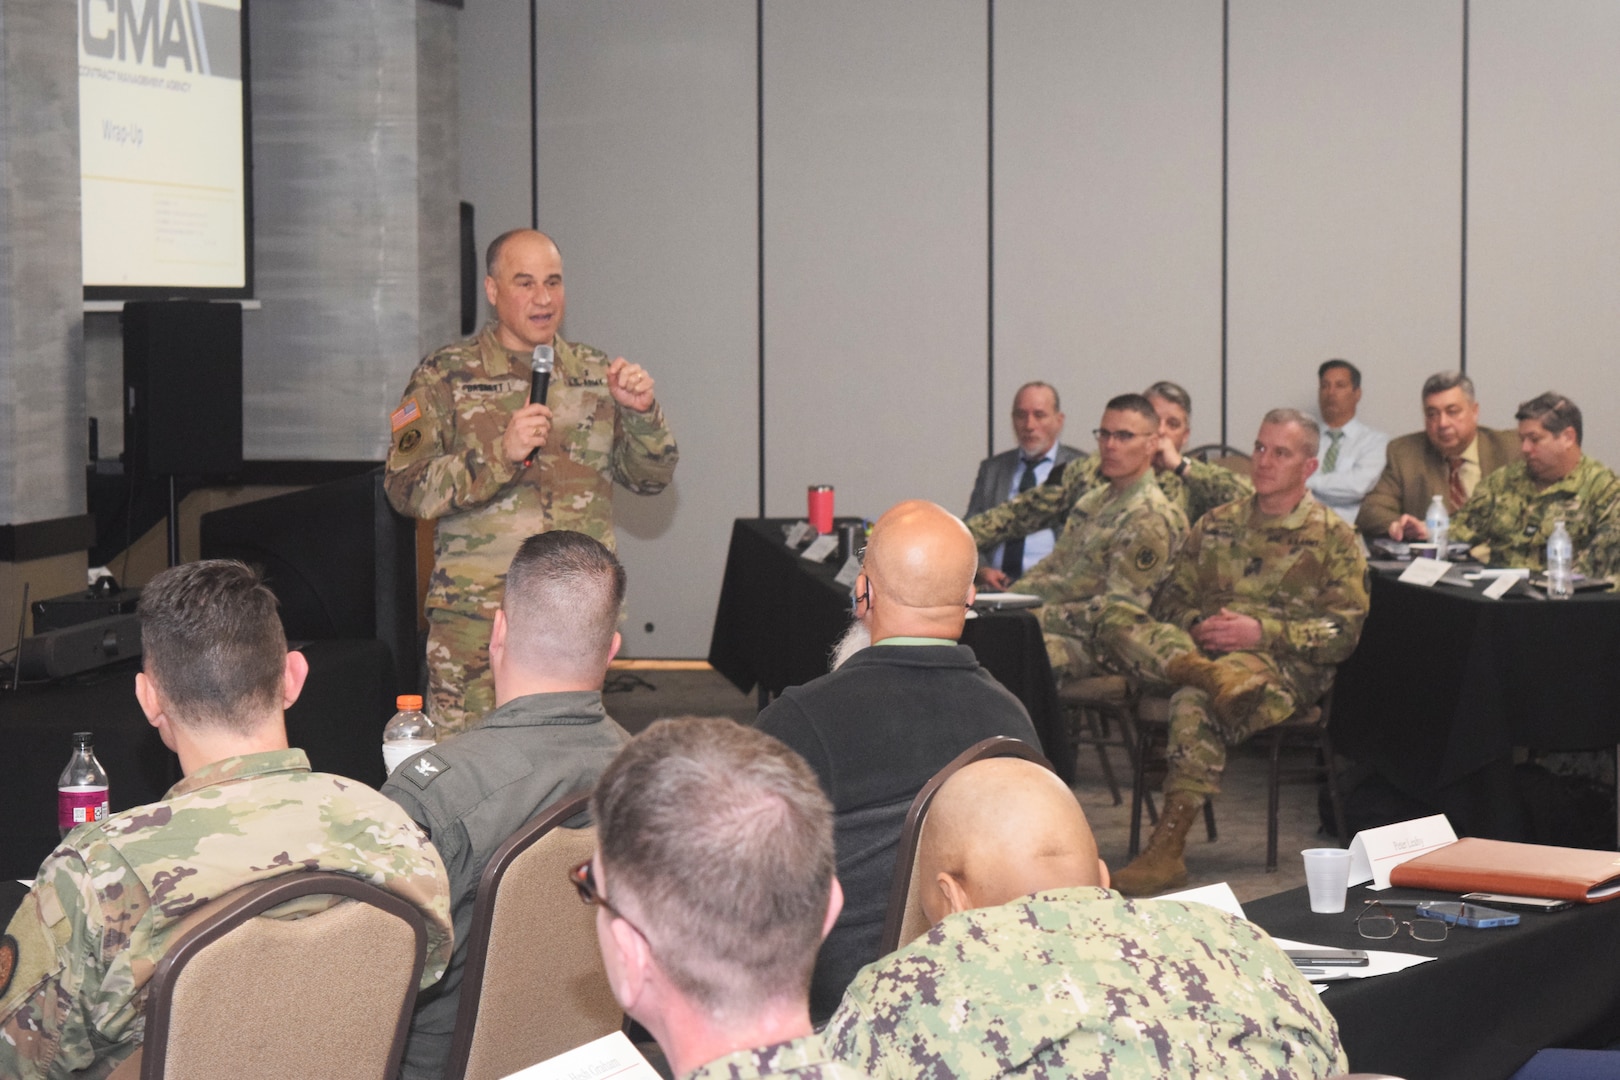 Army general speaks to a room of people, including many in military uniform.